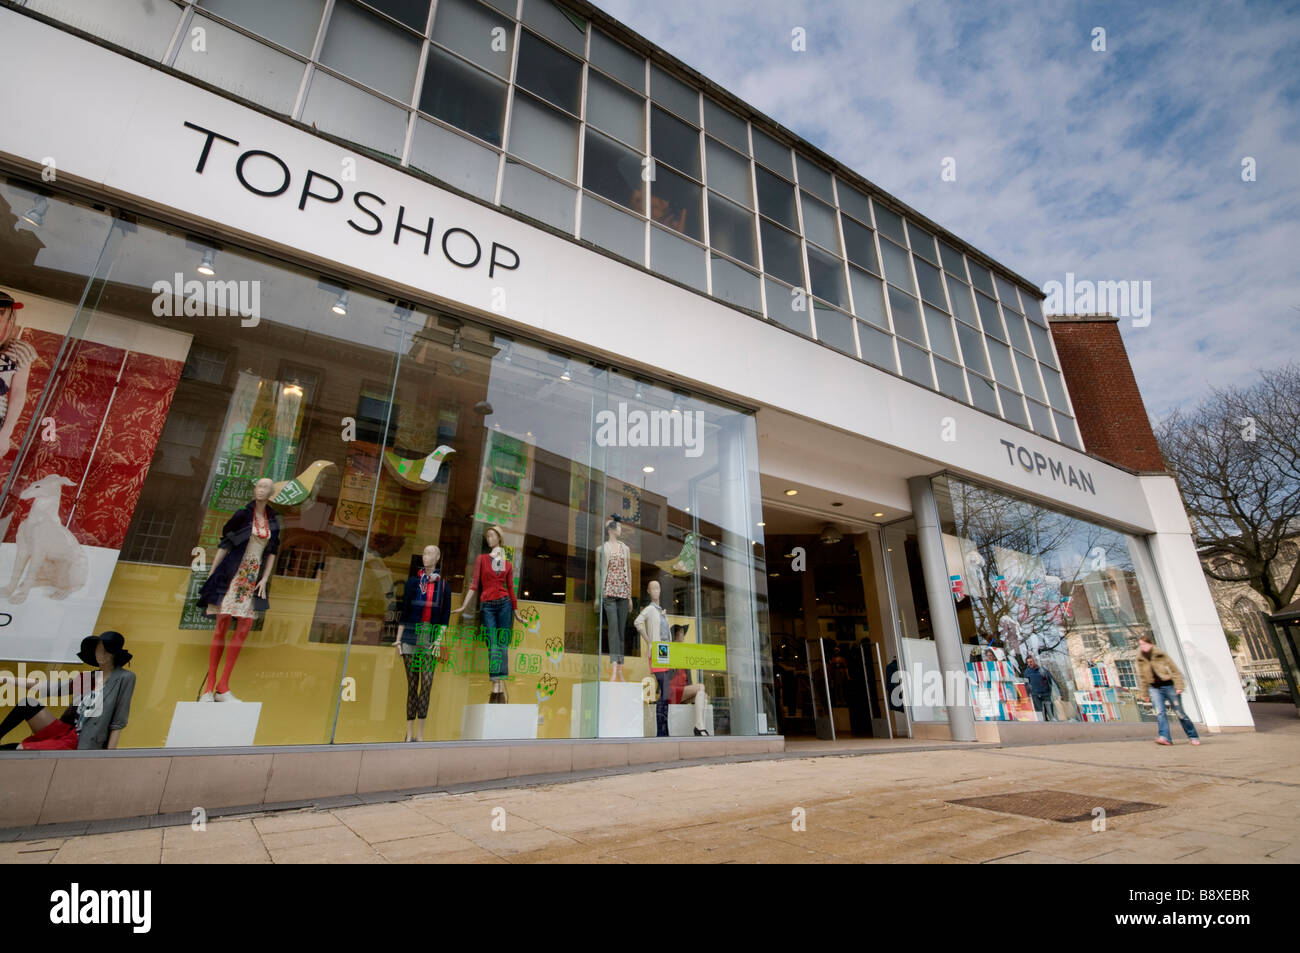 Topshop Clothes Shop High Resolution Stock Photography and Images - Alamy